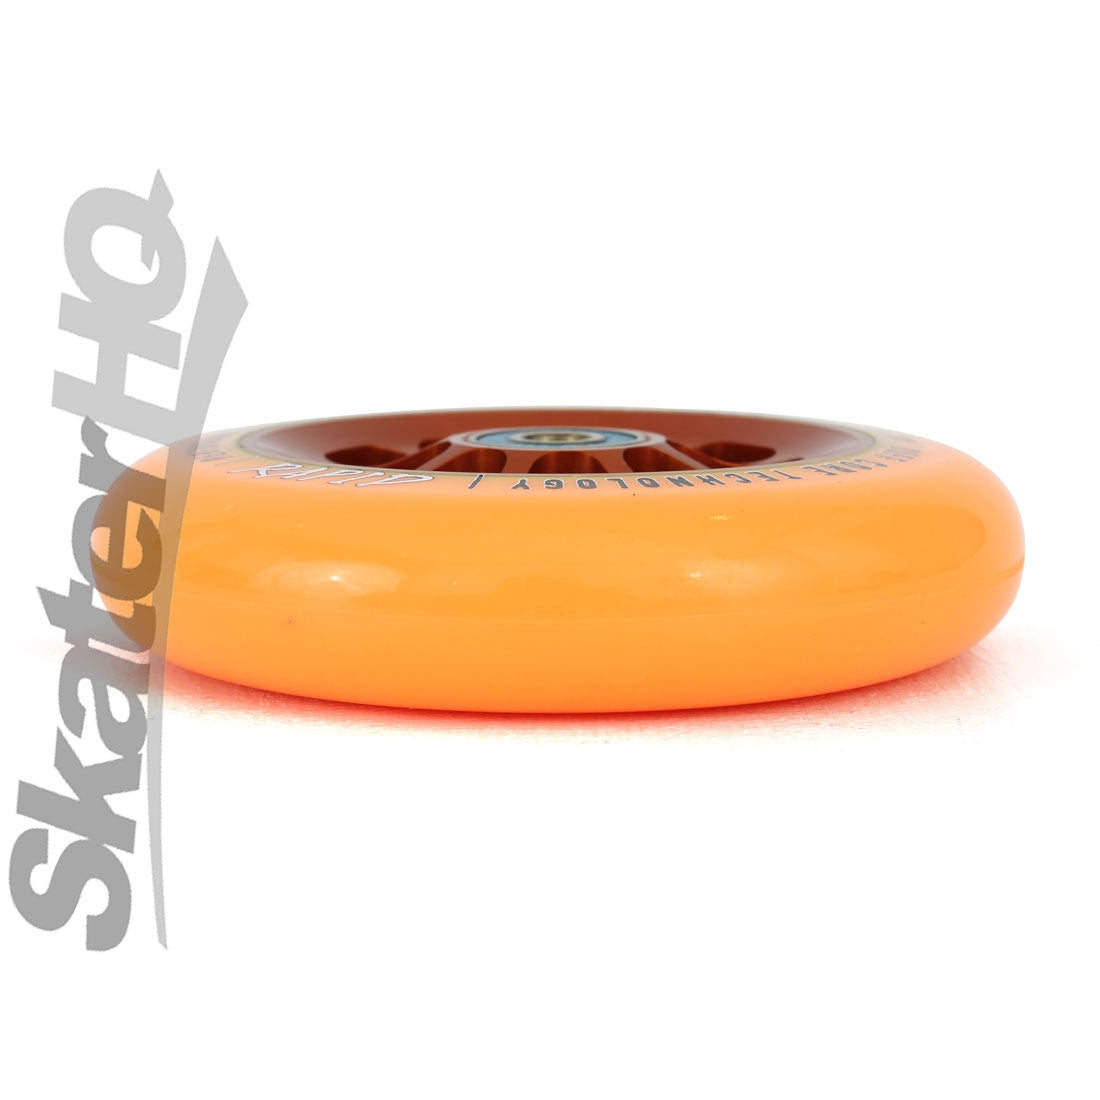 River Rapid 110mm Wheel - Sunset Scooter Wheels